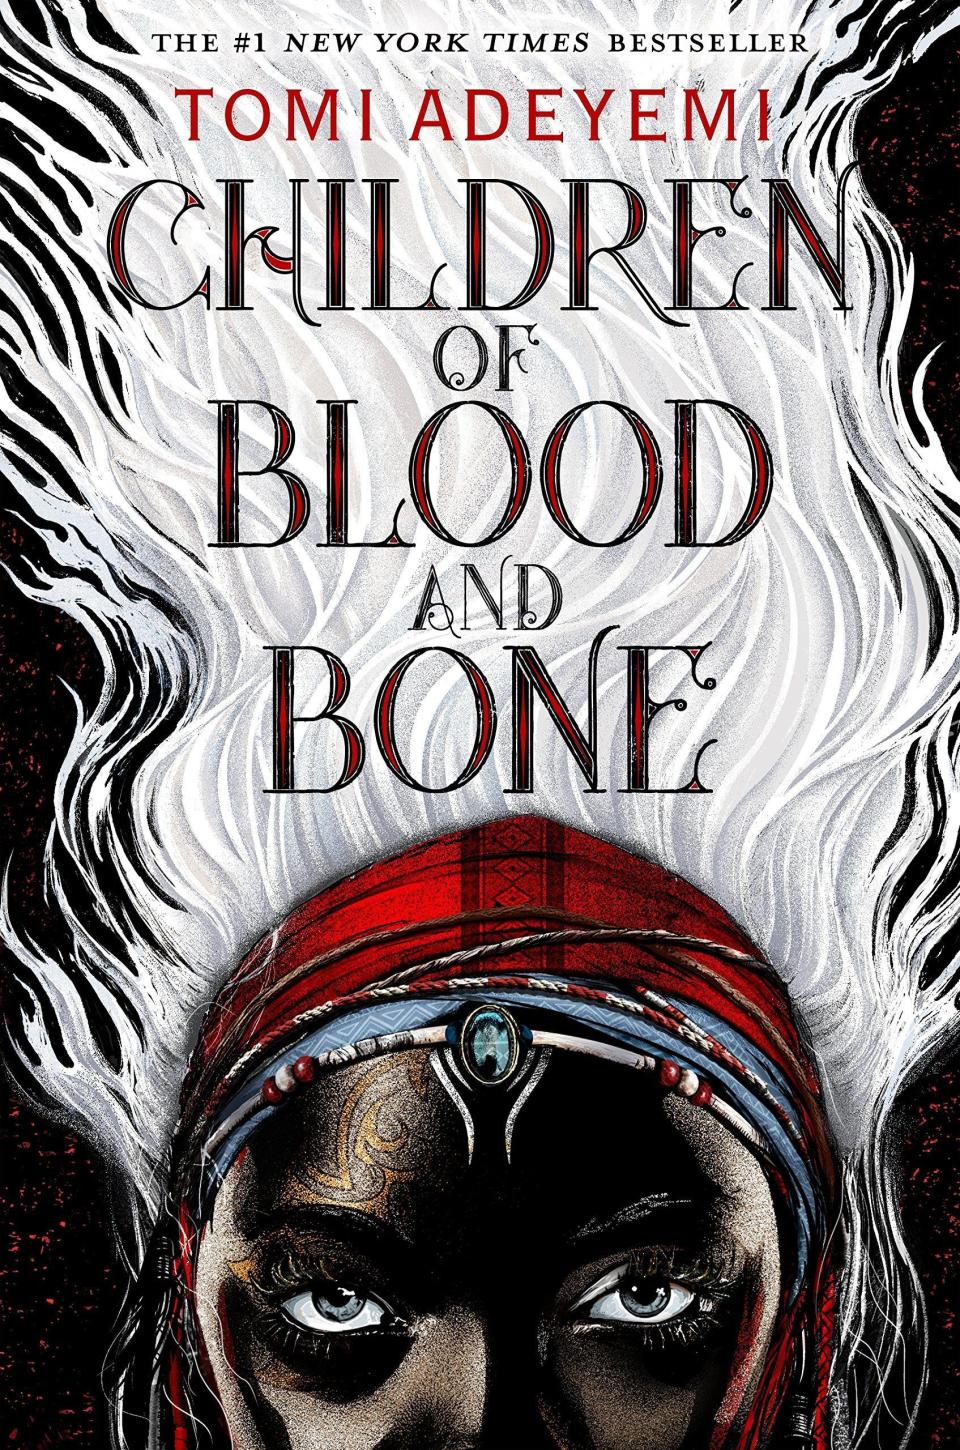 3) "Children of Blood and Bone" by Tomi Adeyemi